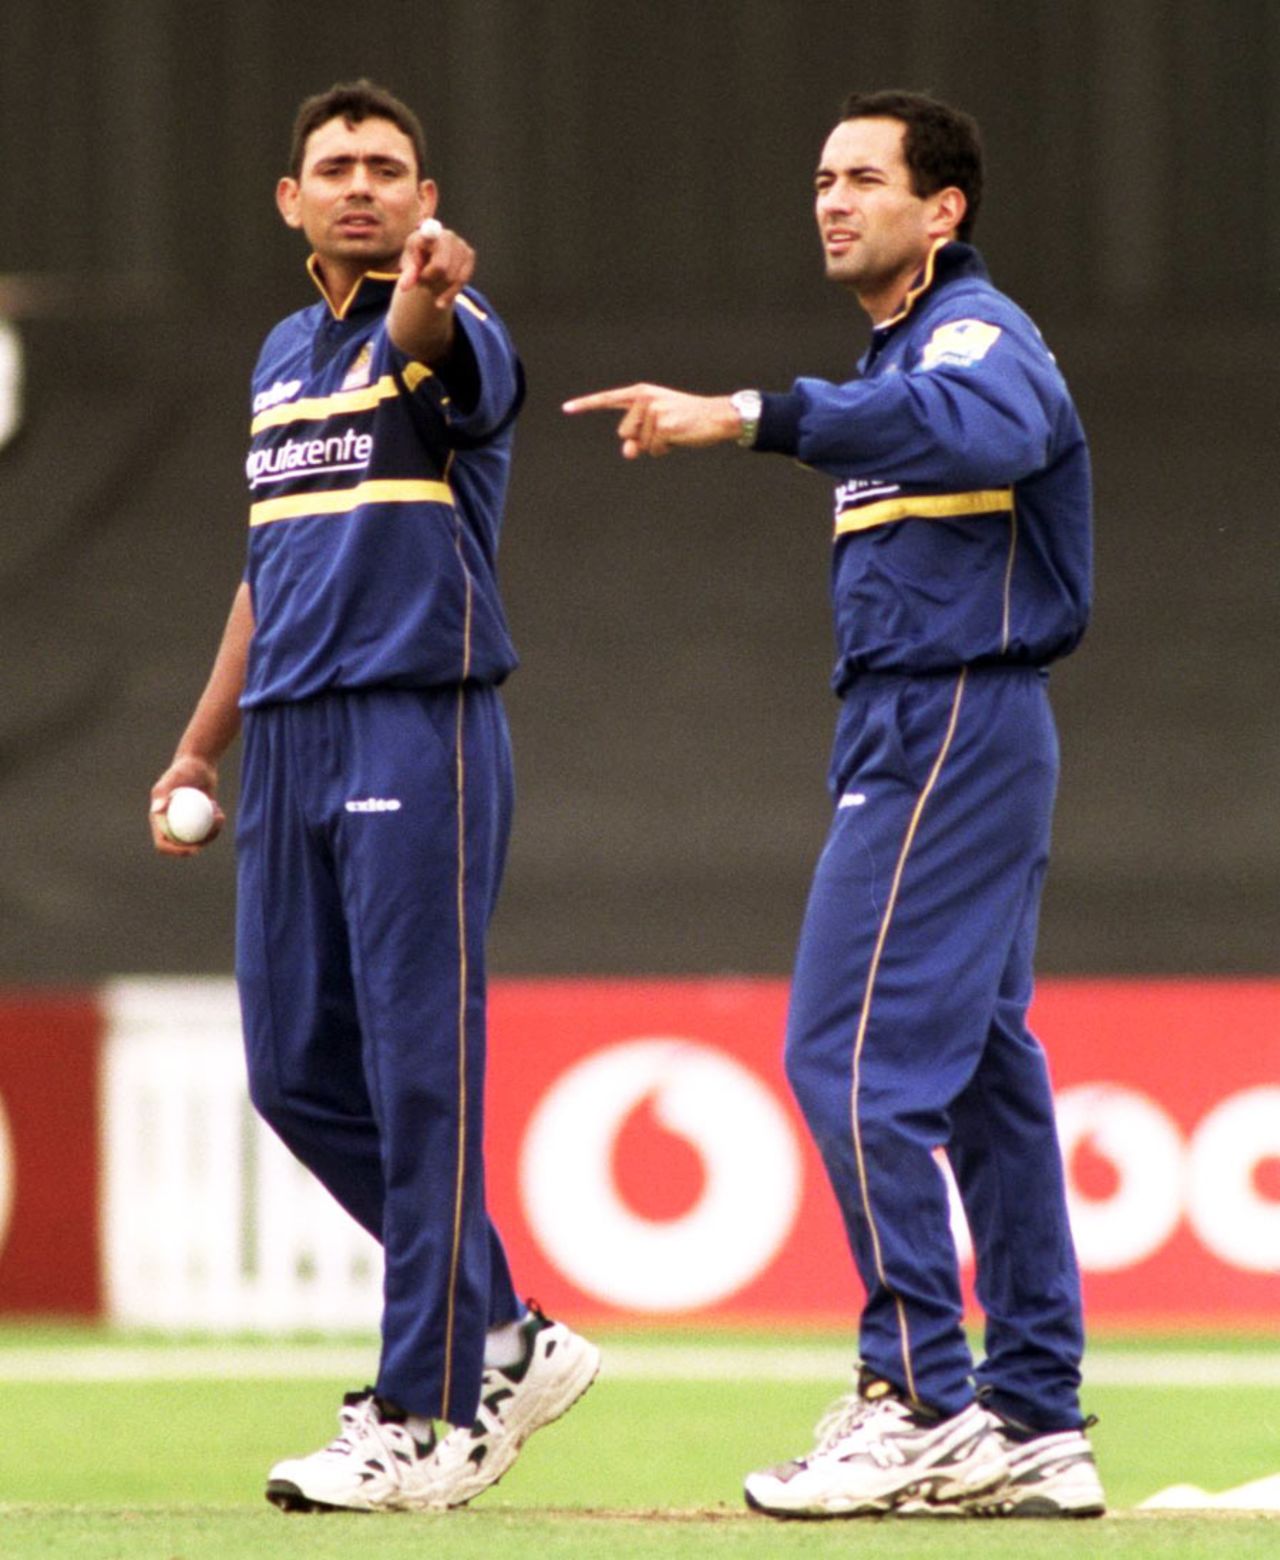 Saqlain Mushtaq and Adam Hollioake set the fields, Surrey v Gloucestershire, Norwich Union League, Division One, The Oval, August 12, 2001